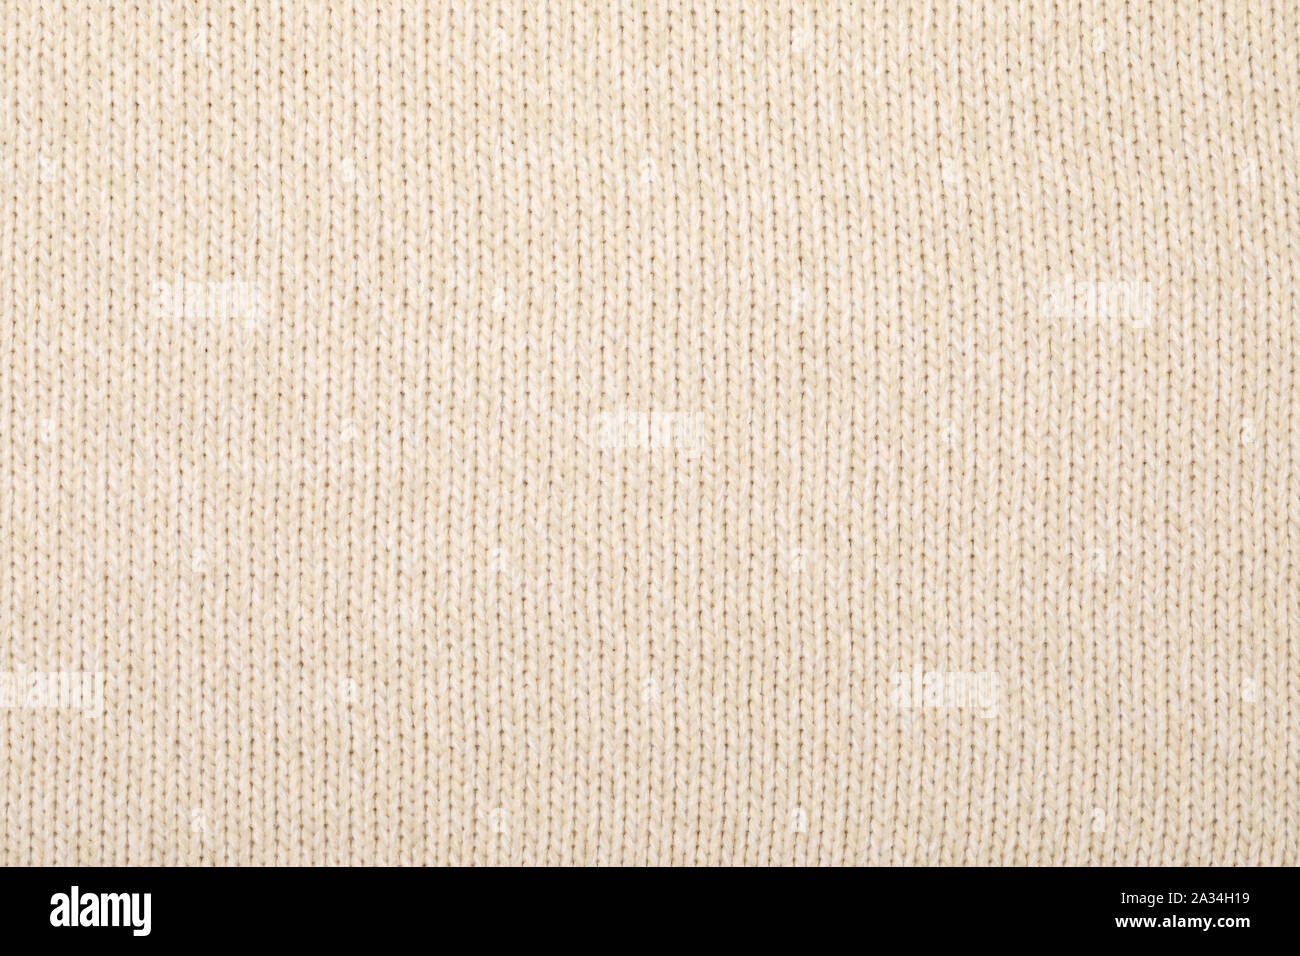 Real beige melange or ombre knitted fabric with ornamental pattern textured  background Stock Photo - Alamy